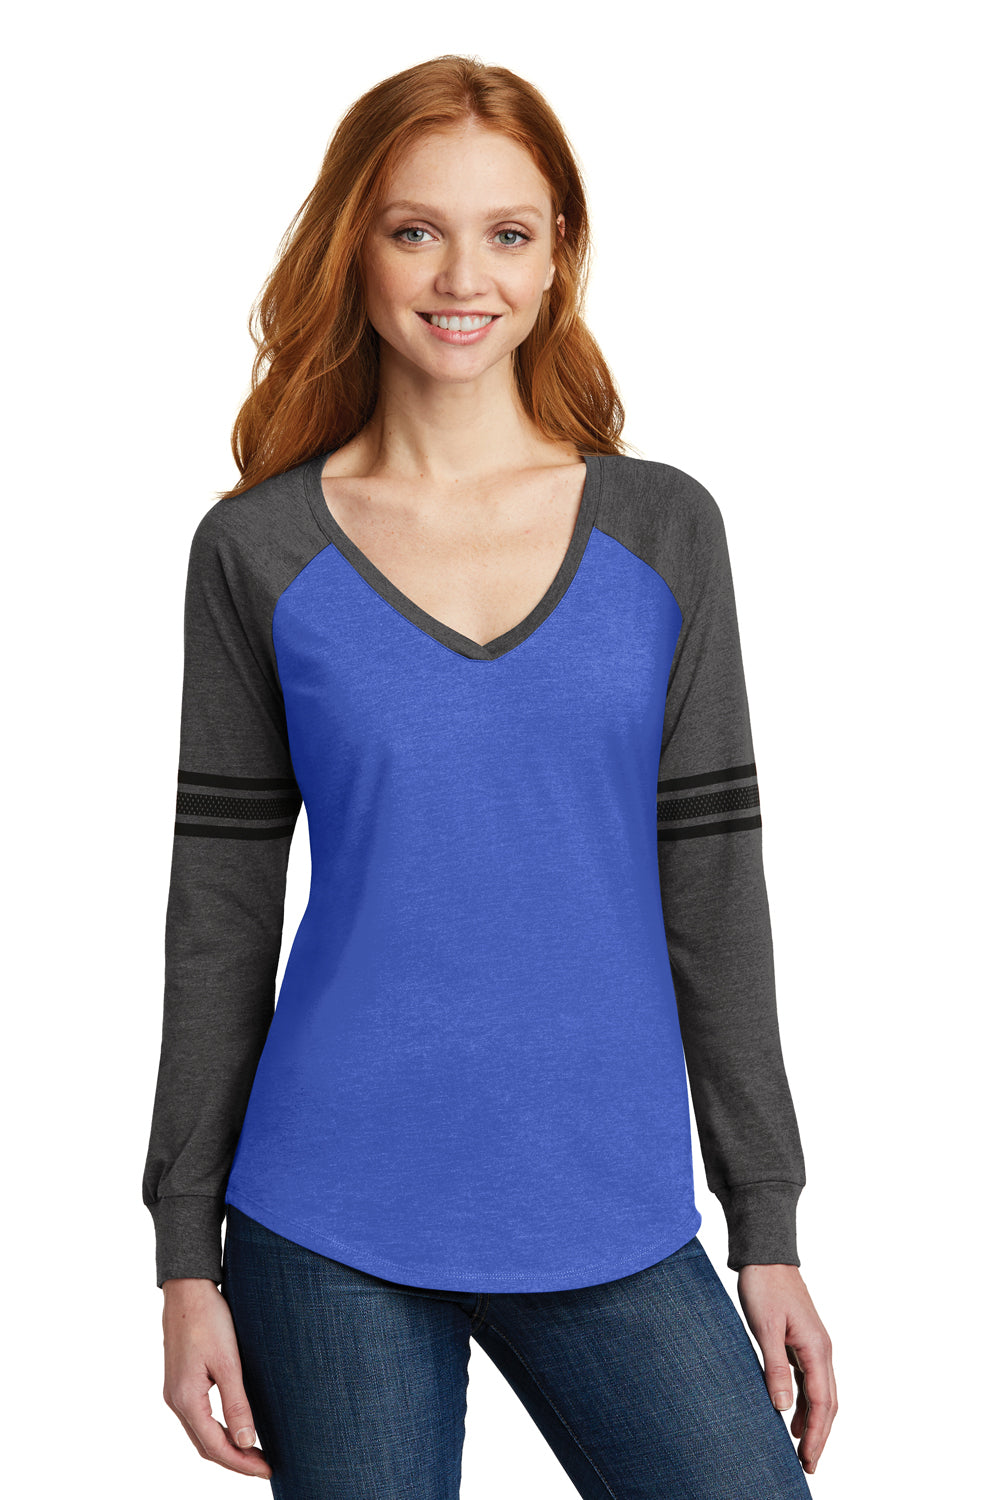 District DM477 Womens Game Long Sleeve V-Neck T-Shirt Heather Royal Blue/Heather Charcoal Grey/Black Front